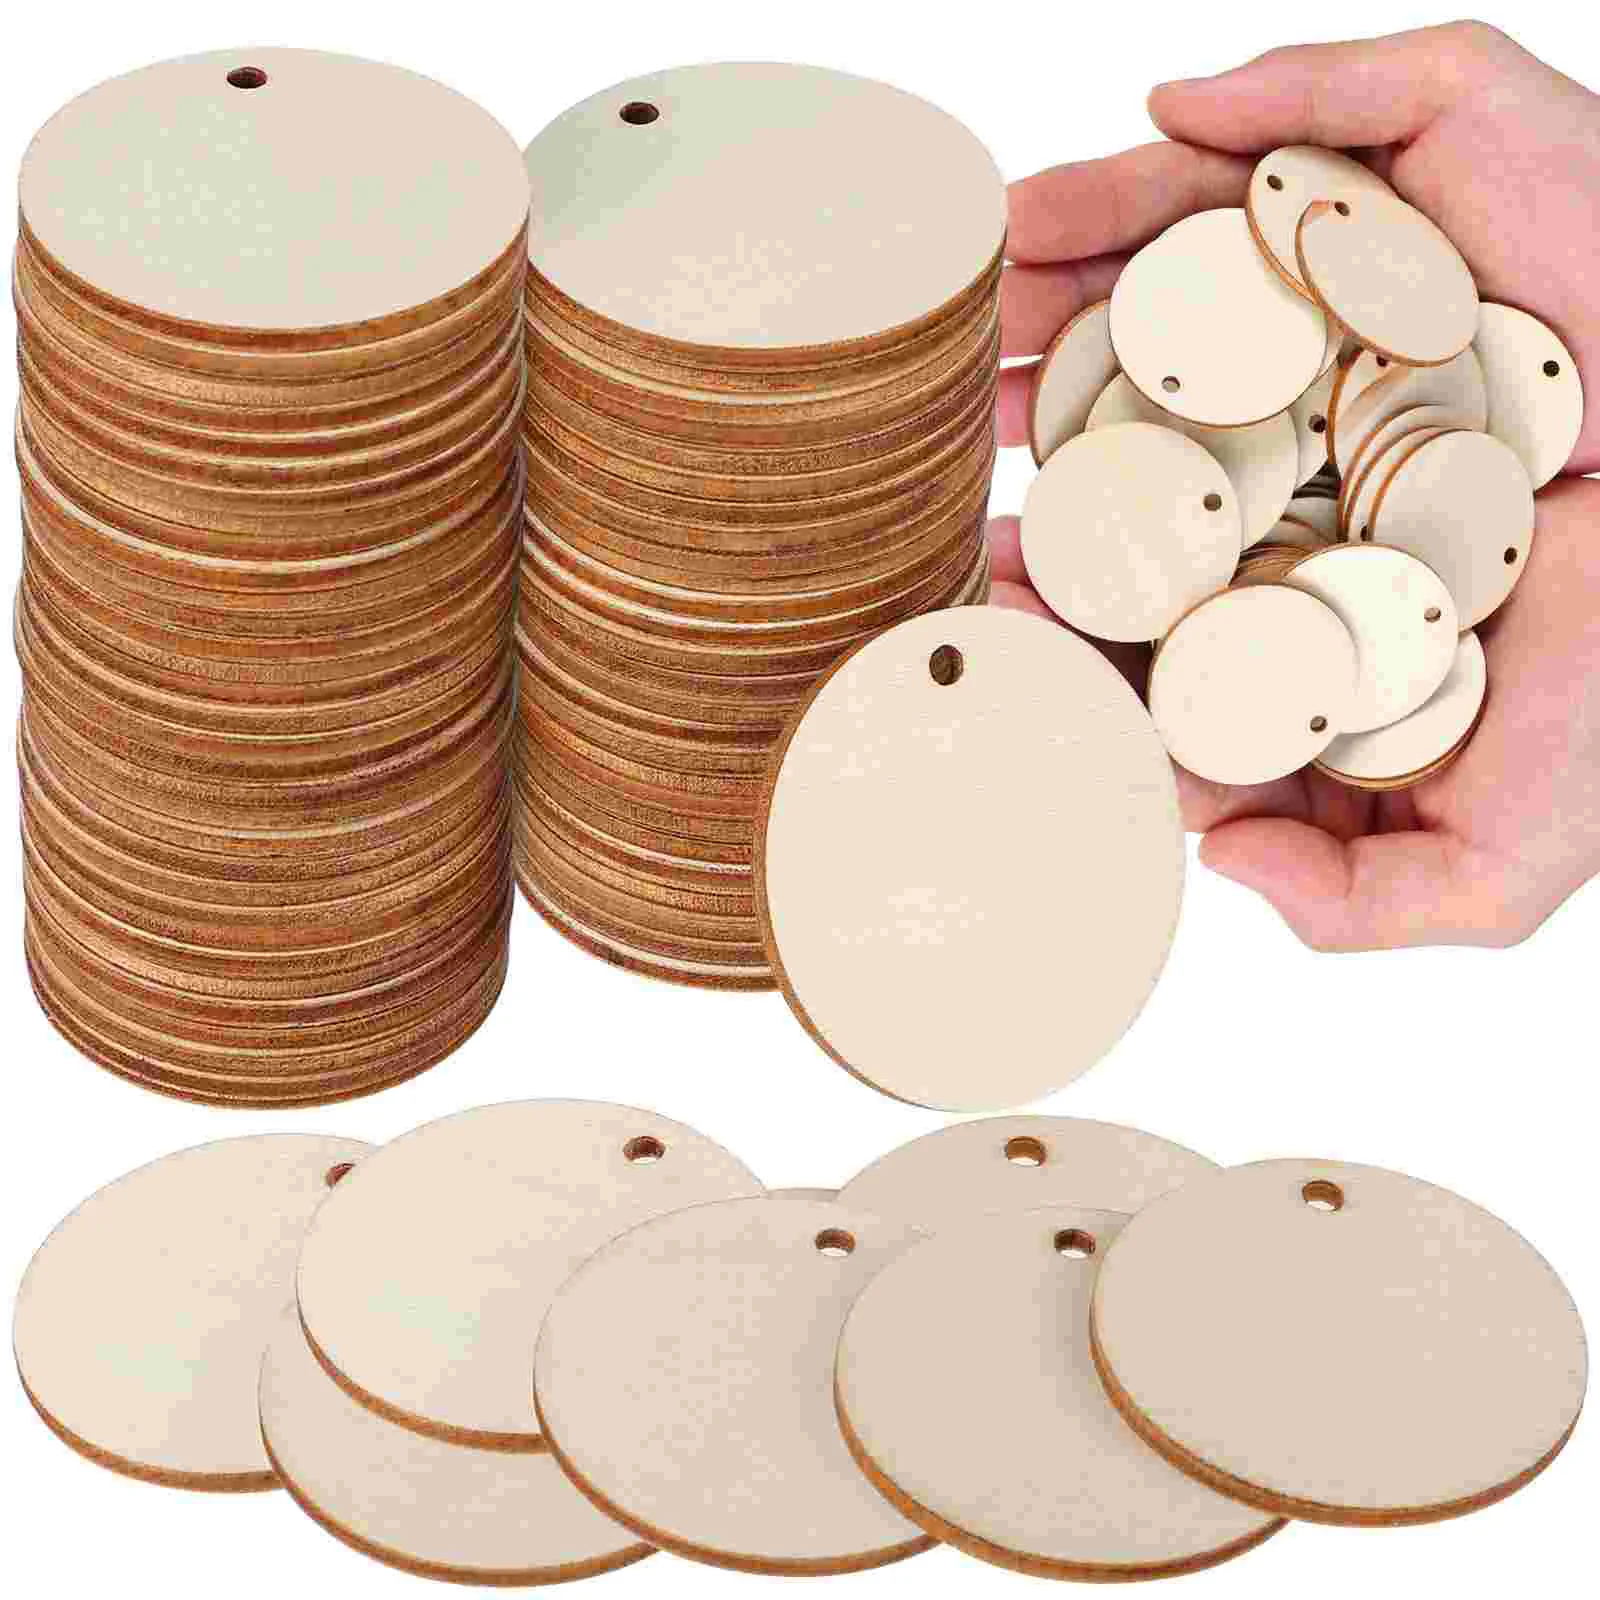 

Wood Wooden Slices Circles Unfinished Round Blank Tags Christmas Discs Holes Crafts Blanks Diy Natural Mini Ornaments Pendants